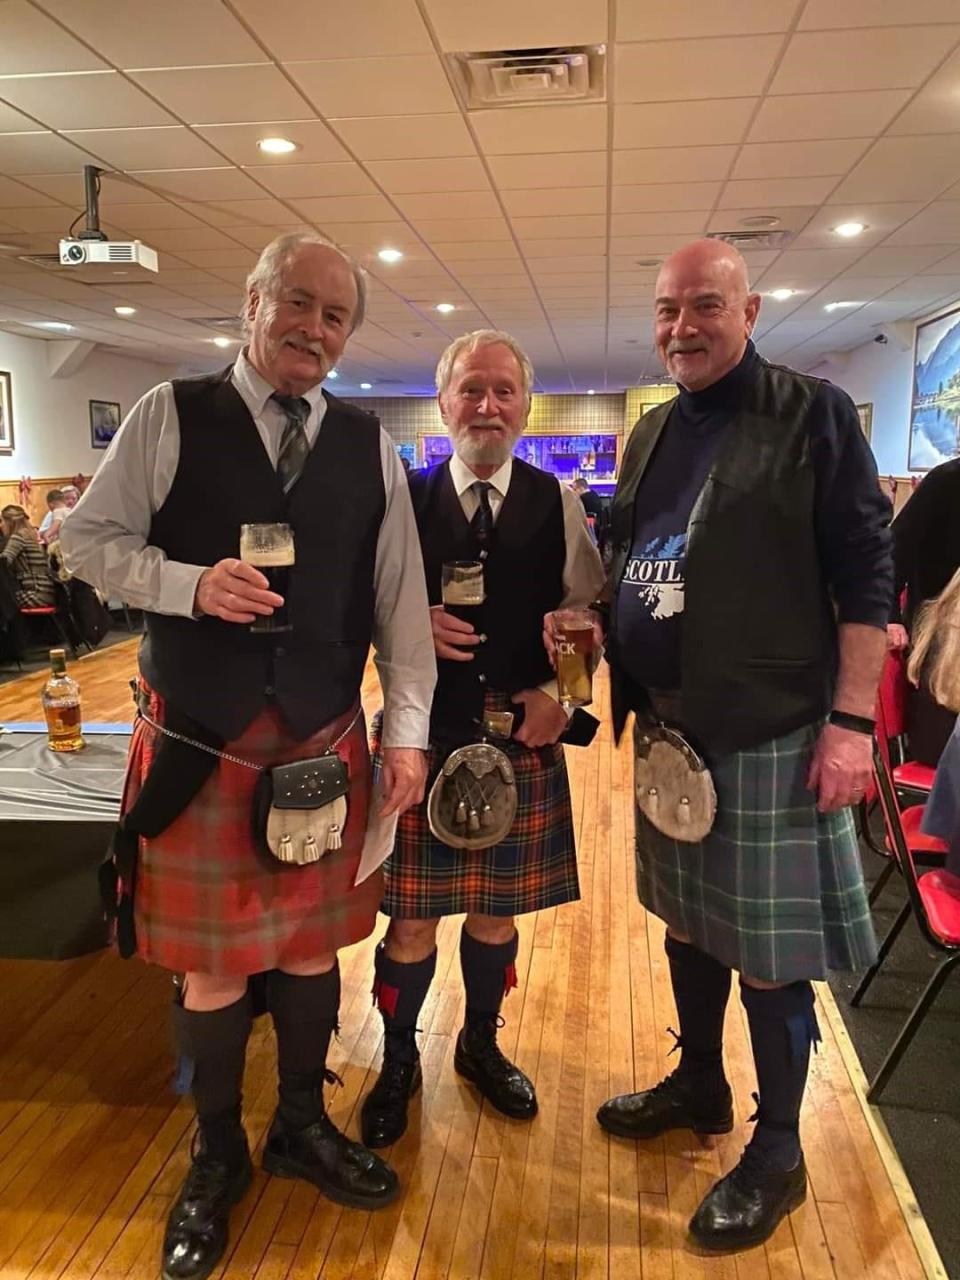 From left, Joe McGonigall, Bill Gordon and Bob Duncan at the annual Robert Burns Celebration at the Scots American Club in Kearny.